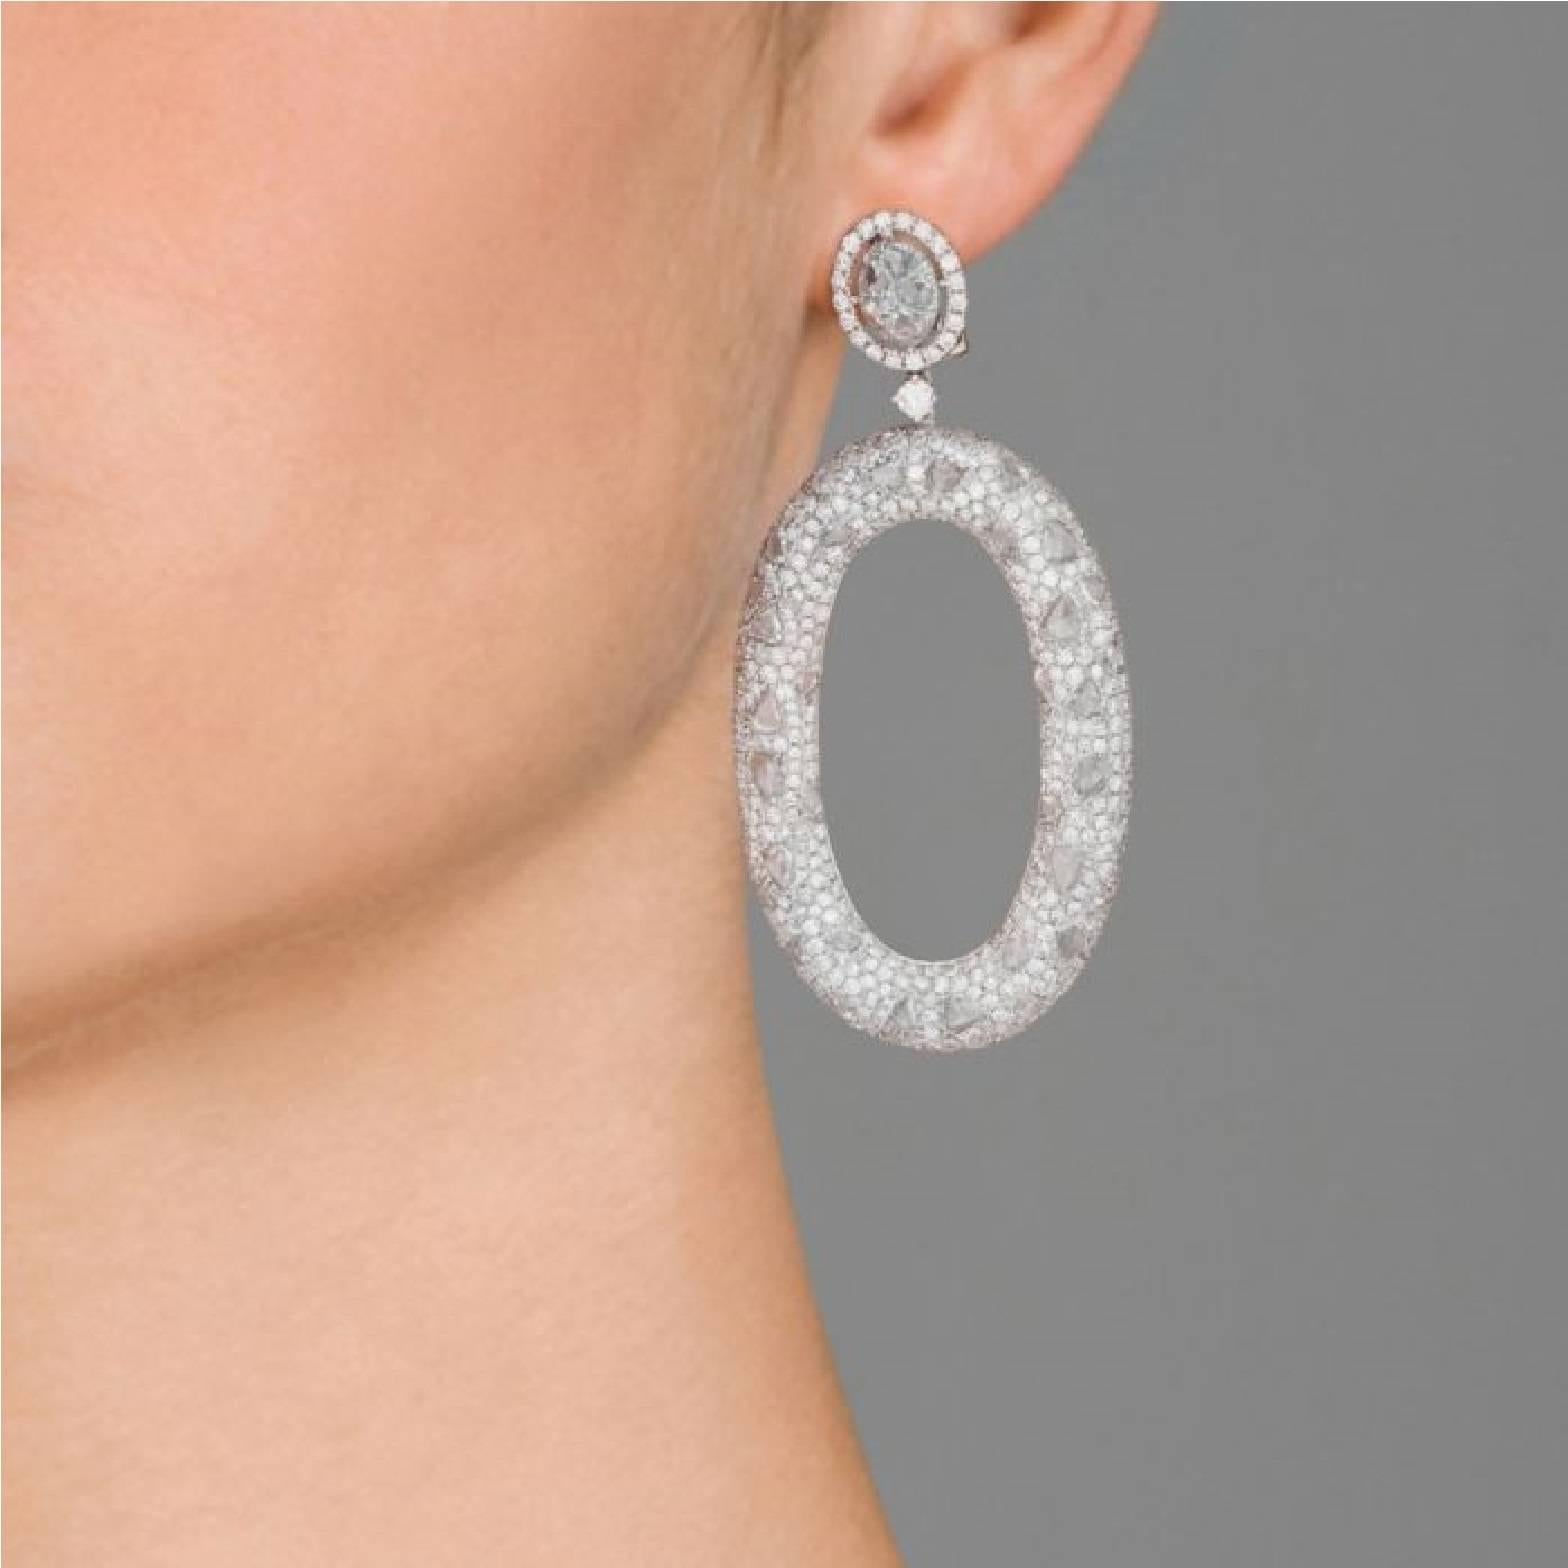 Oval drop pave diamonds throughout
Faceted diamond oval post with pave border
Round cut diamond at link
Omega back closure
Length of drop: 2.5